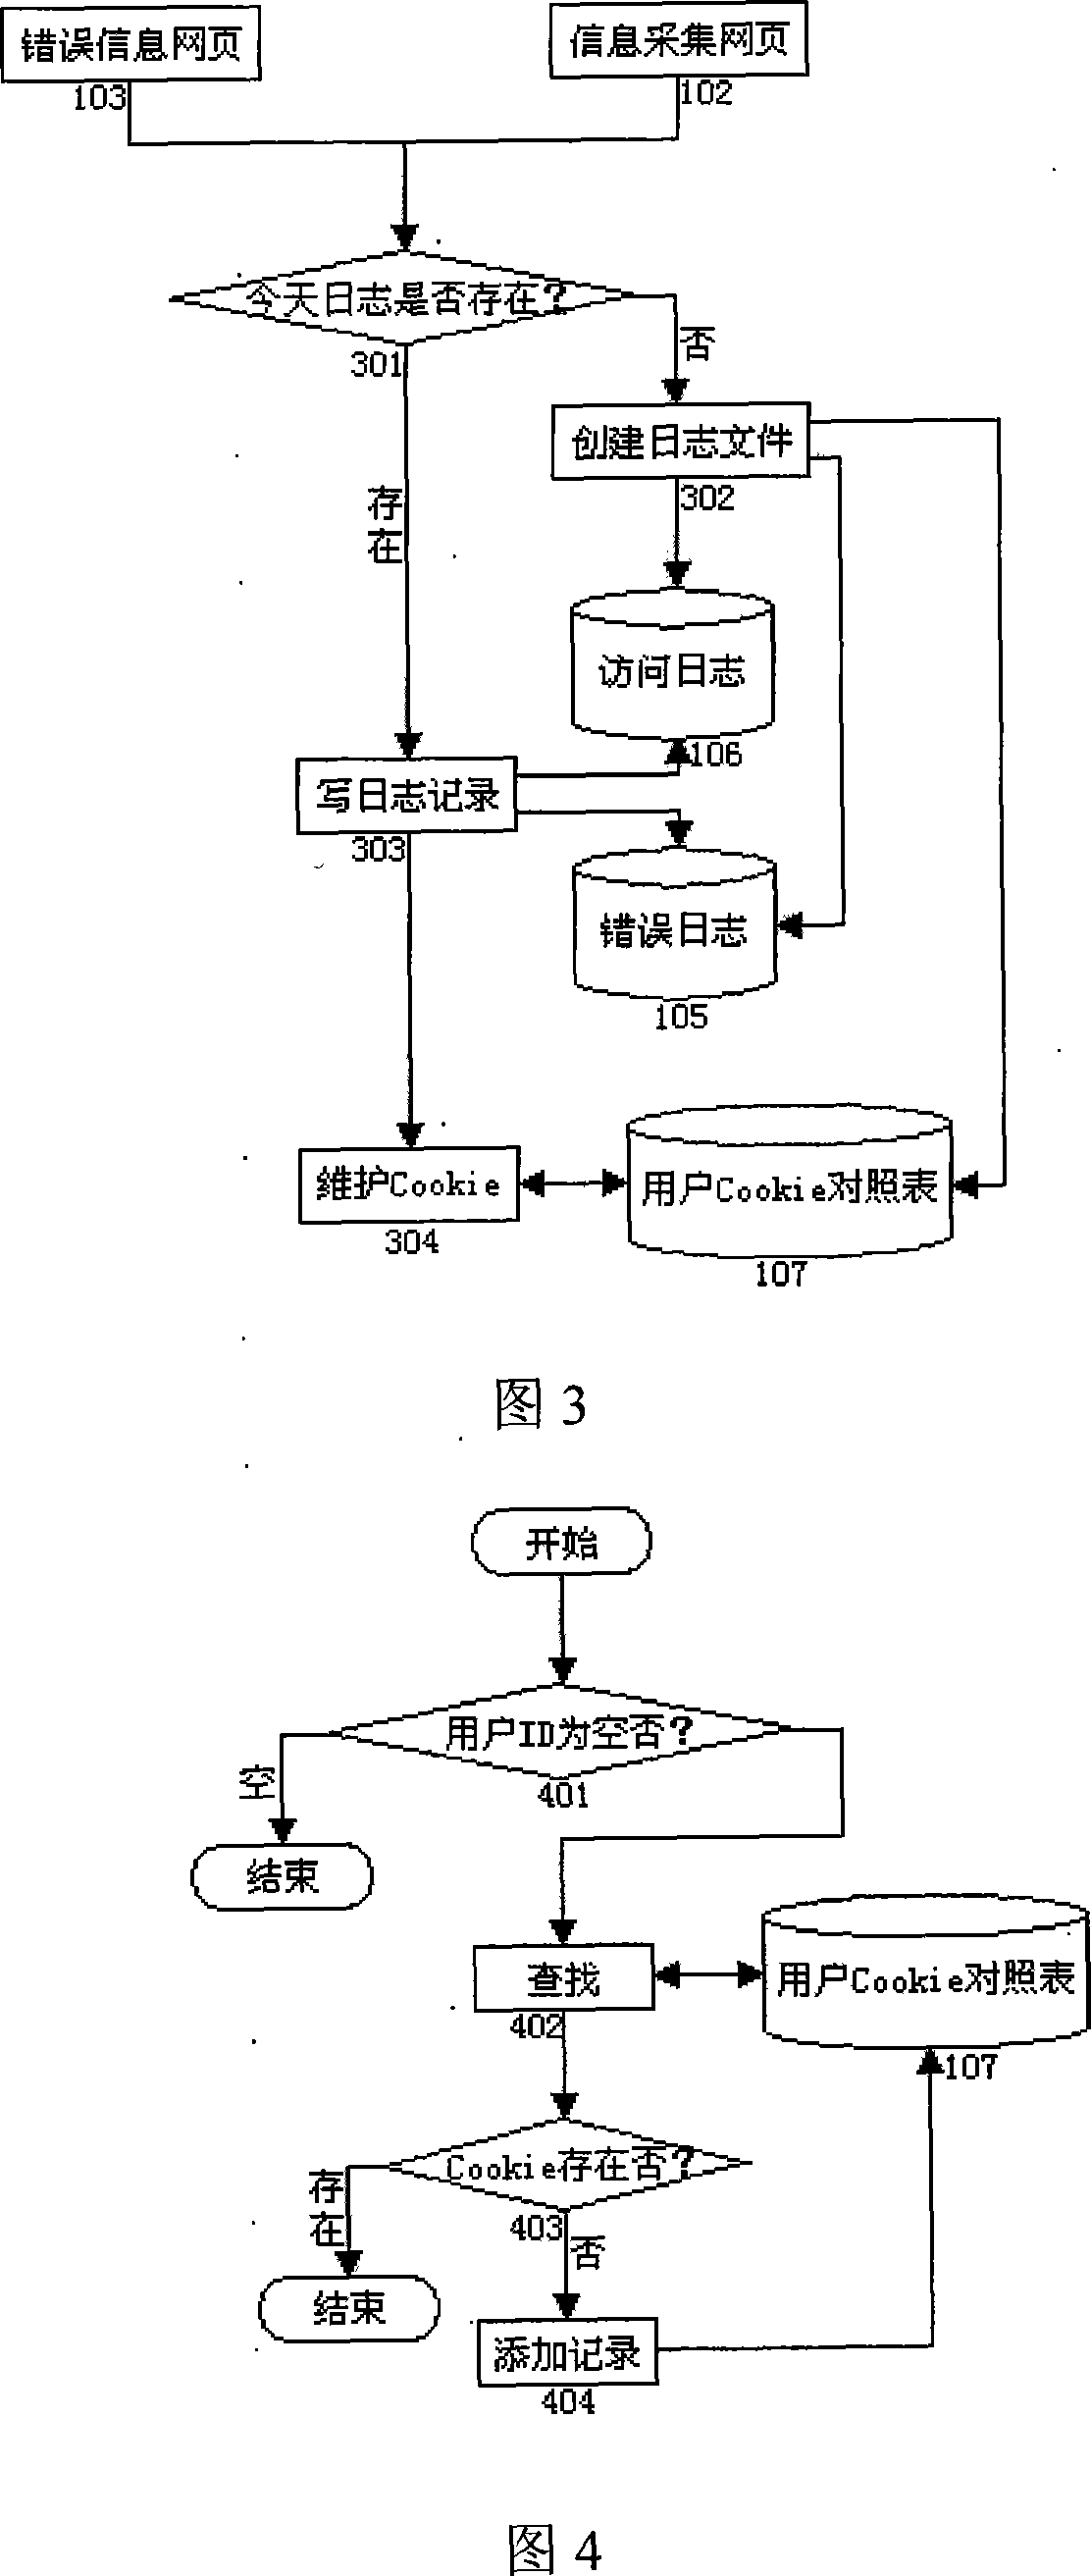 Website access analysis system and method based on built-in code proxy log